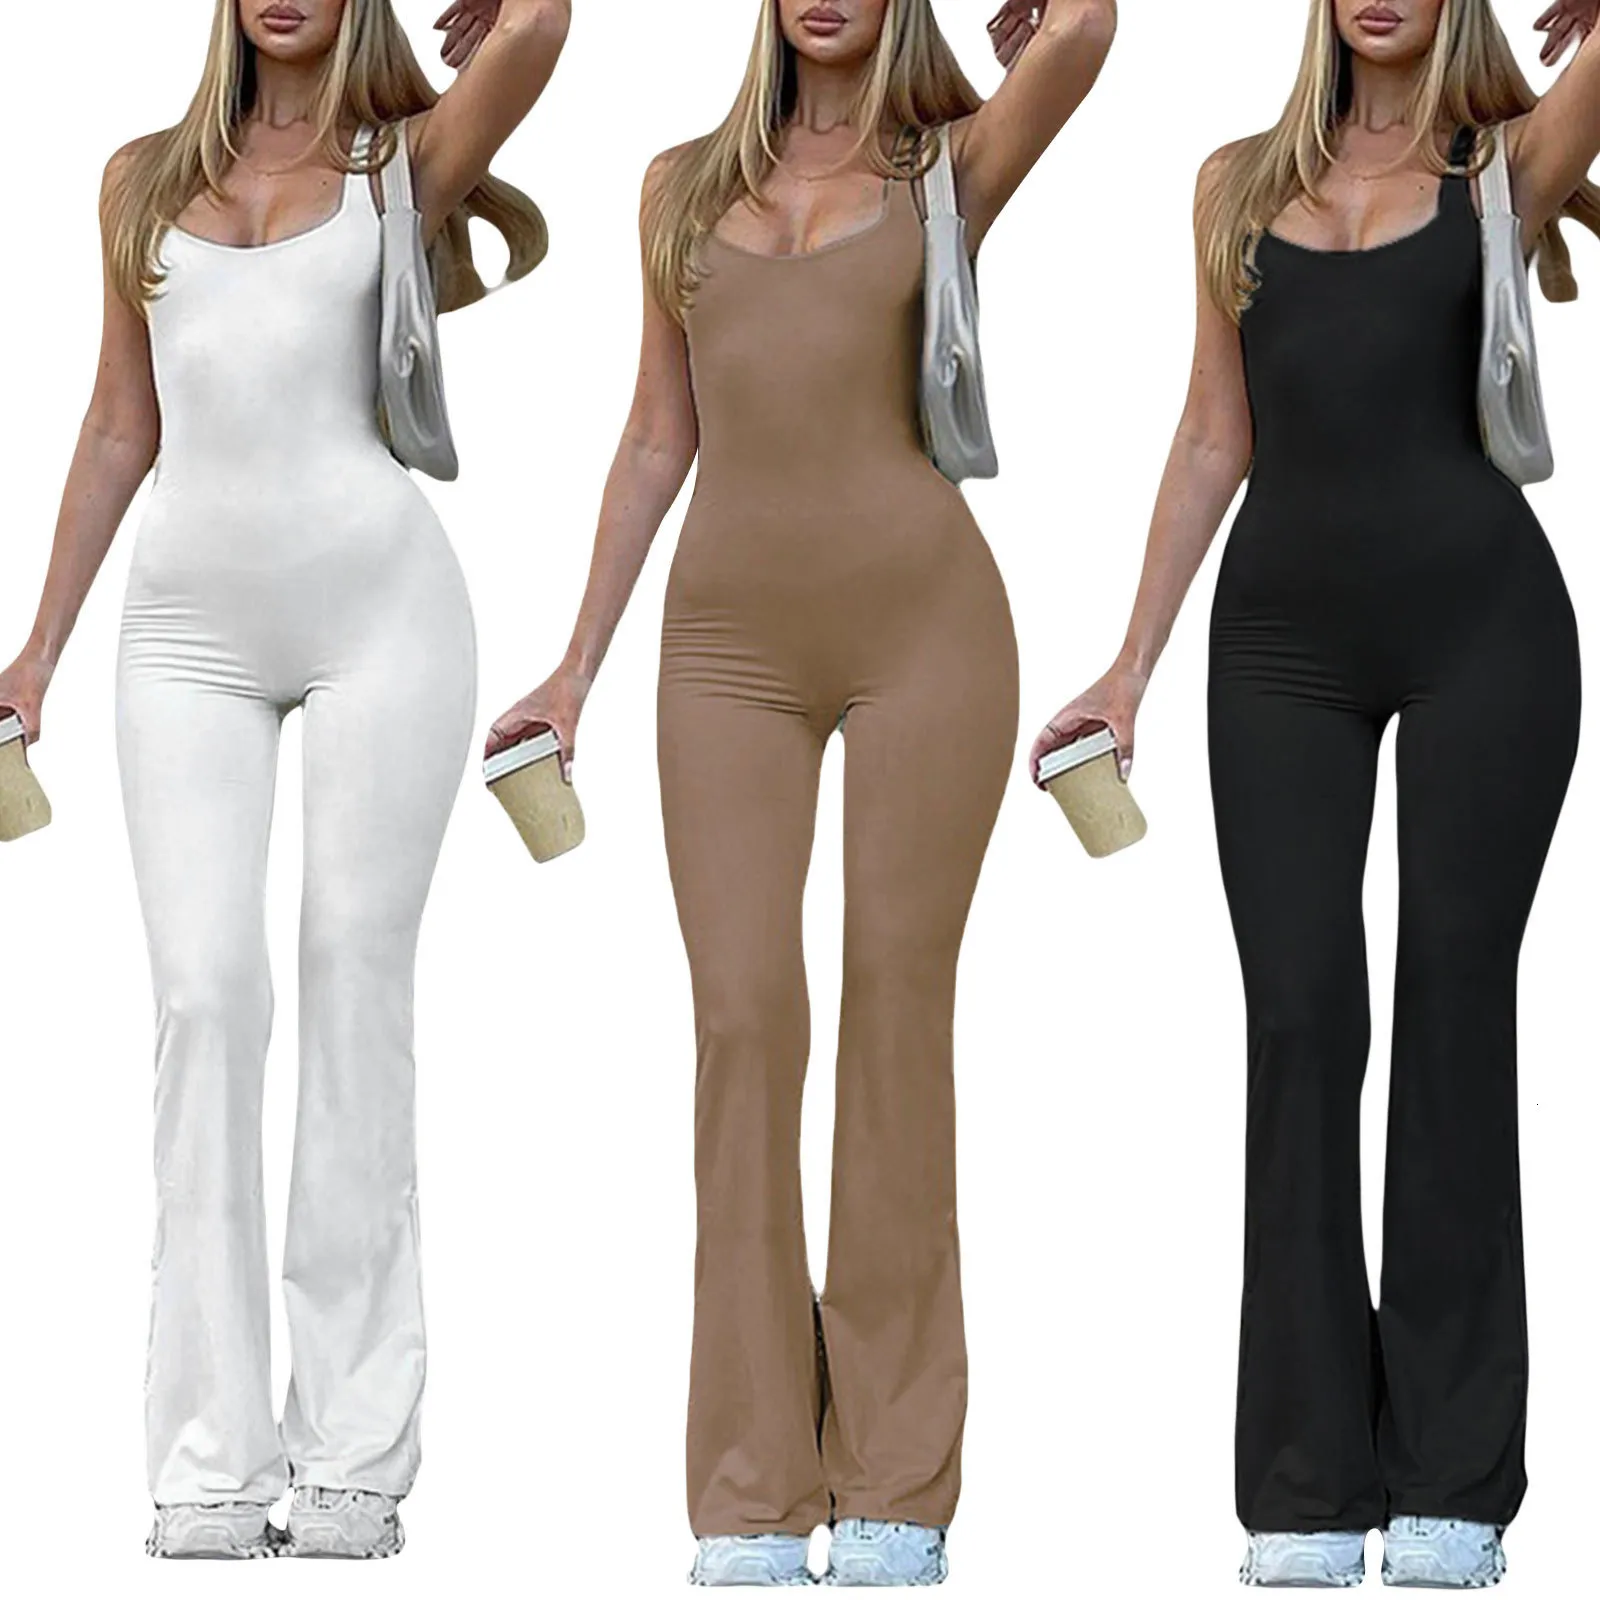 Women's Jumpsuits Rompers Women Sexy Bodycon Long Sleeve Square Neck OnePiece Romper Ribbed Knit Yoga Jumpsuit Workout Unitard Playsuit Backless Jumpsuits 230223